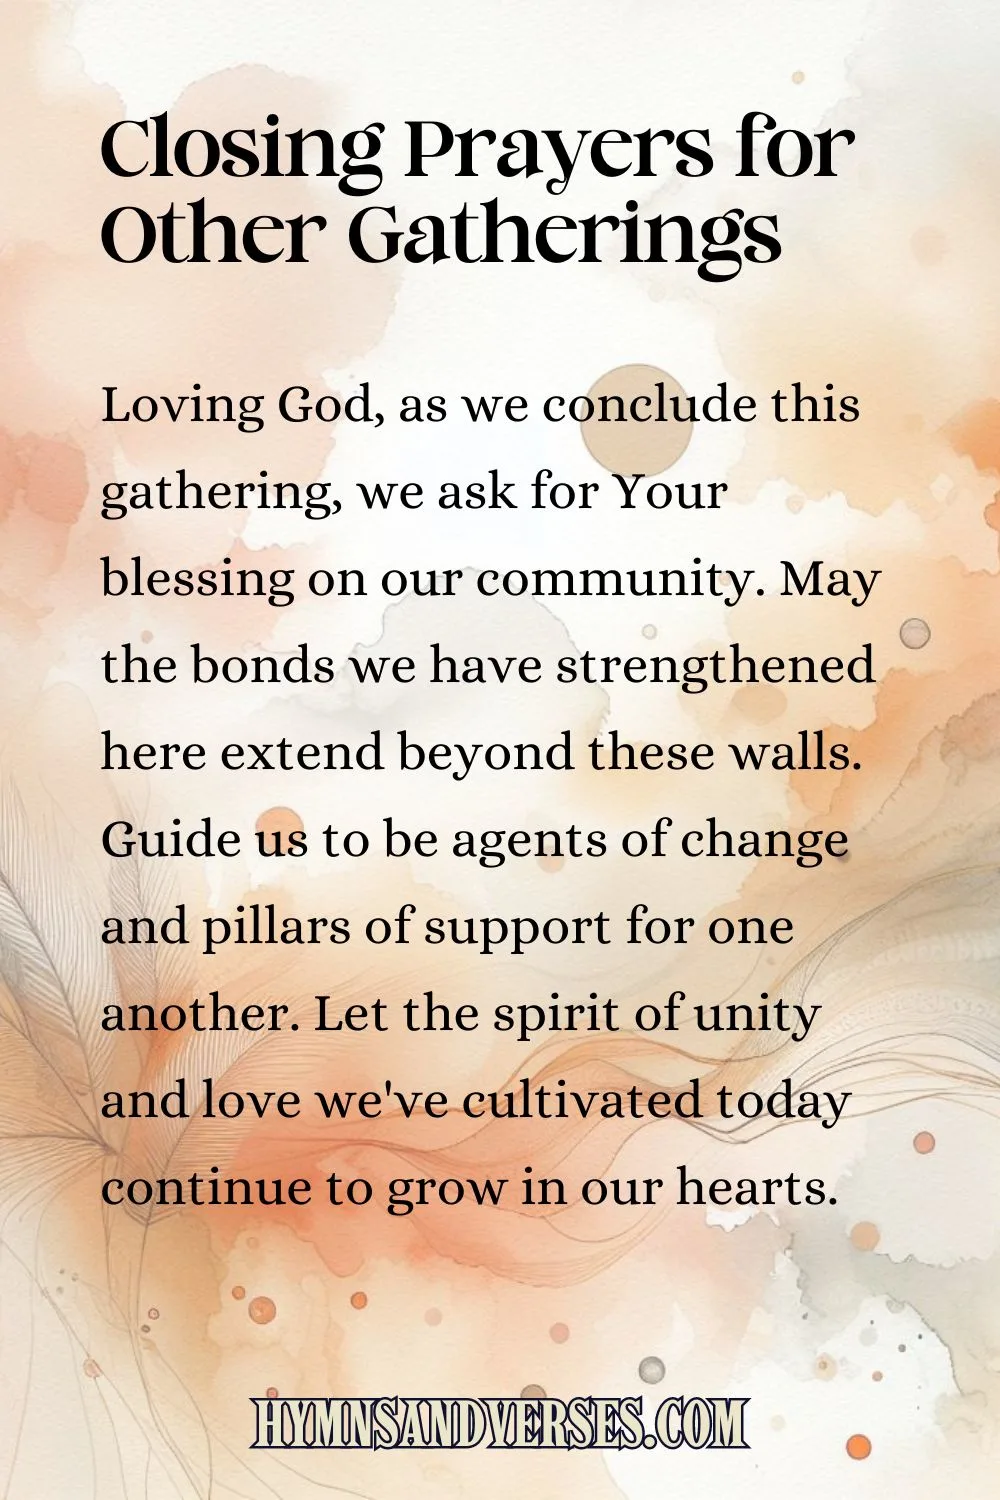 Pin size image for closing prayers for other gatherings, reads: Loving God, as we conclude this gathering, we ask for Your blessing on our community. May the bonds we have strengthened here extend beyond these walls. Guide us to be agents of change and pillars of support for one another. Let the spirit of unity and love we've cultivated today continue to grow in our hearts. 